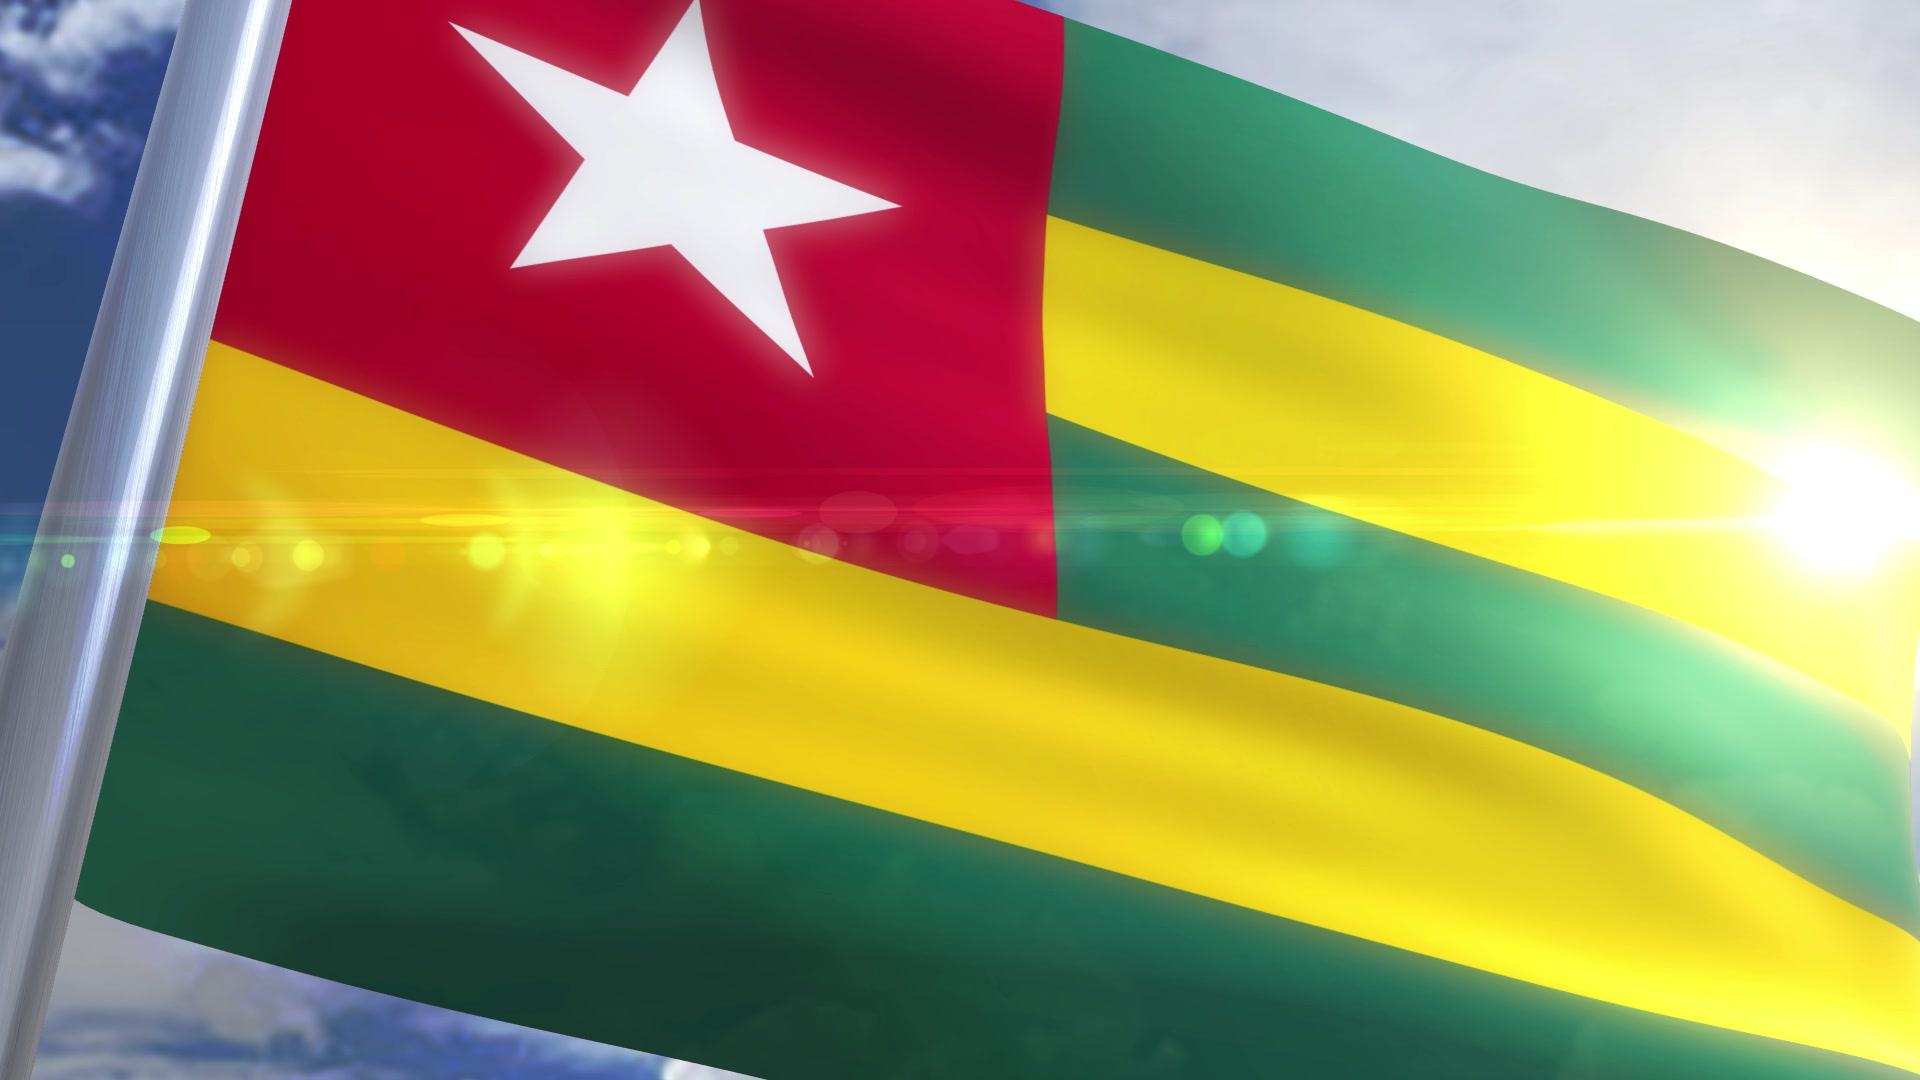 Waving flag of Togo Animation HD Video Clips & Stock Video